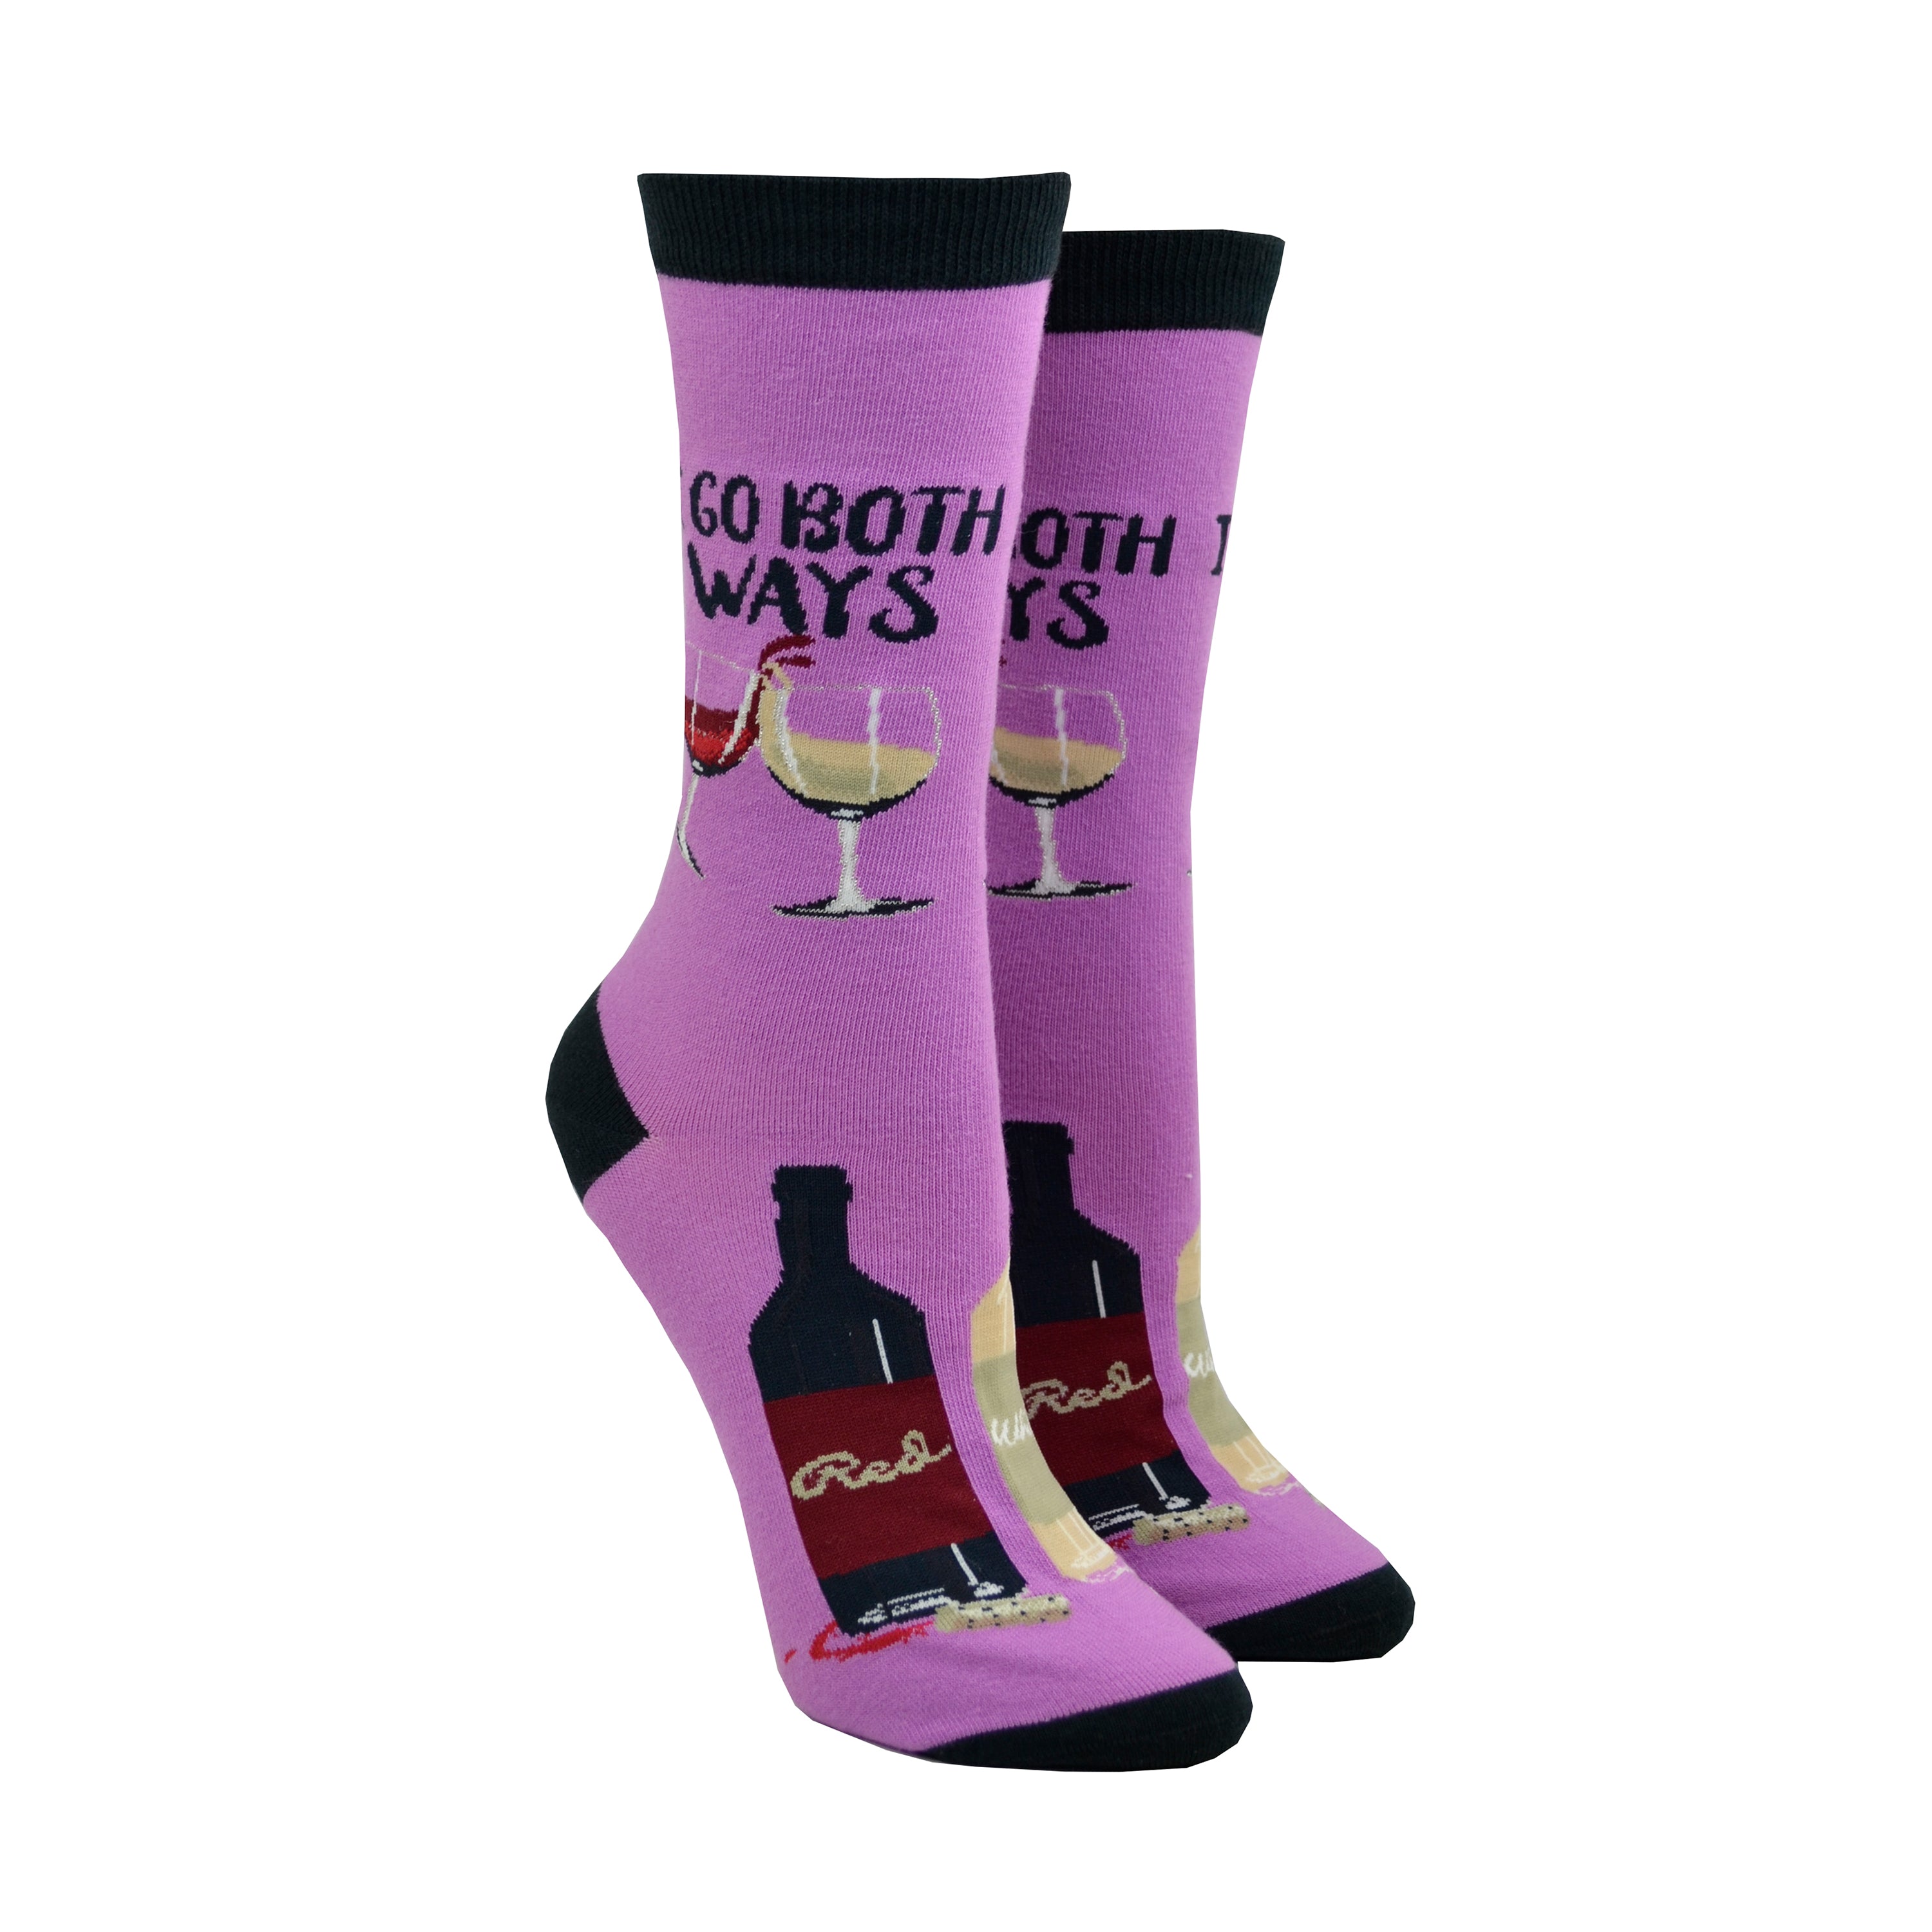 Cotton blend women's purple crew socks with a black heel, toe, and, cuff shown on leg forms. These socks feature calf design of two glasses of wine, one red and one white, with the words, 